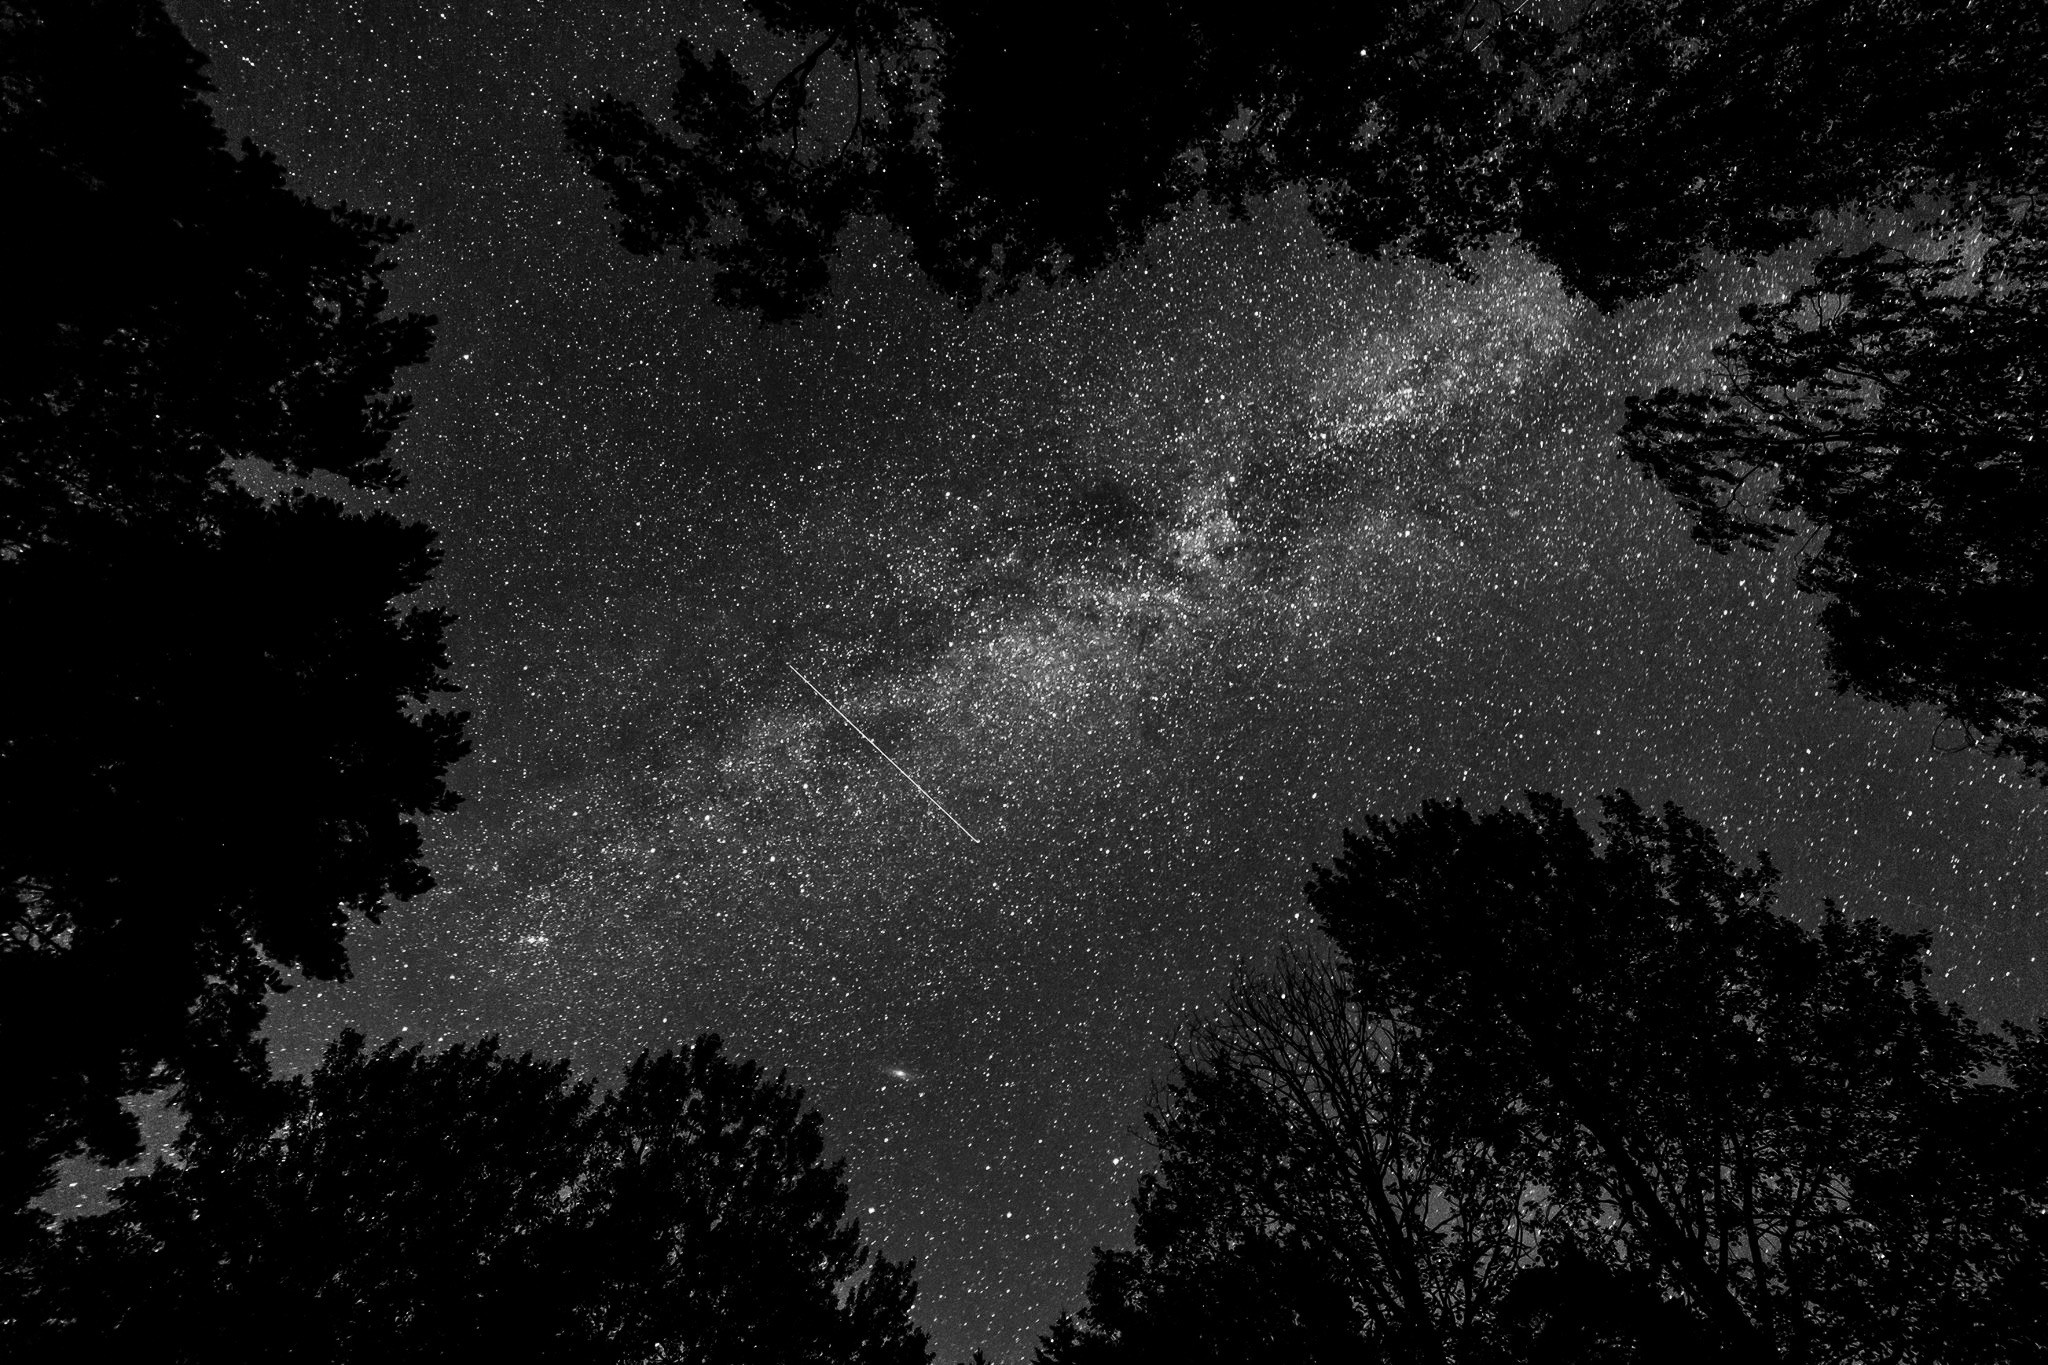 General 2048x1365 stars space black nature looking up monochrome worm's eye view sky